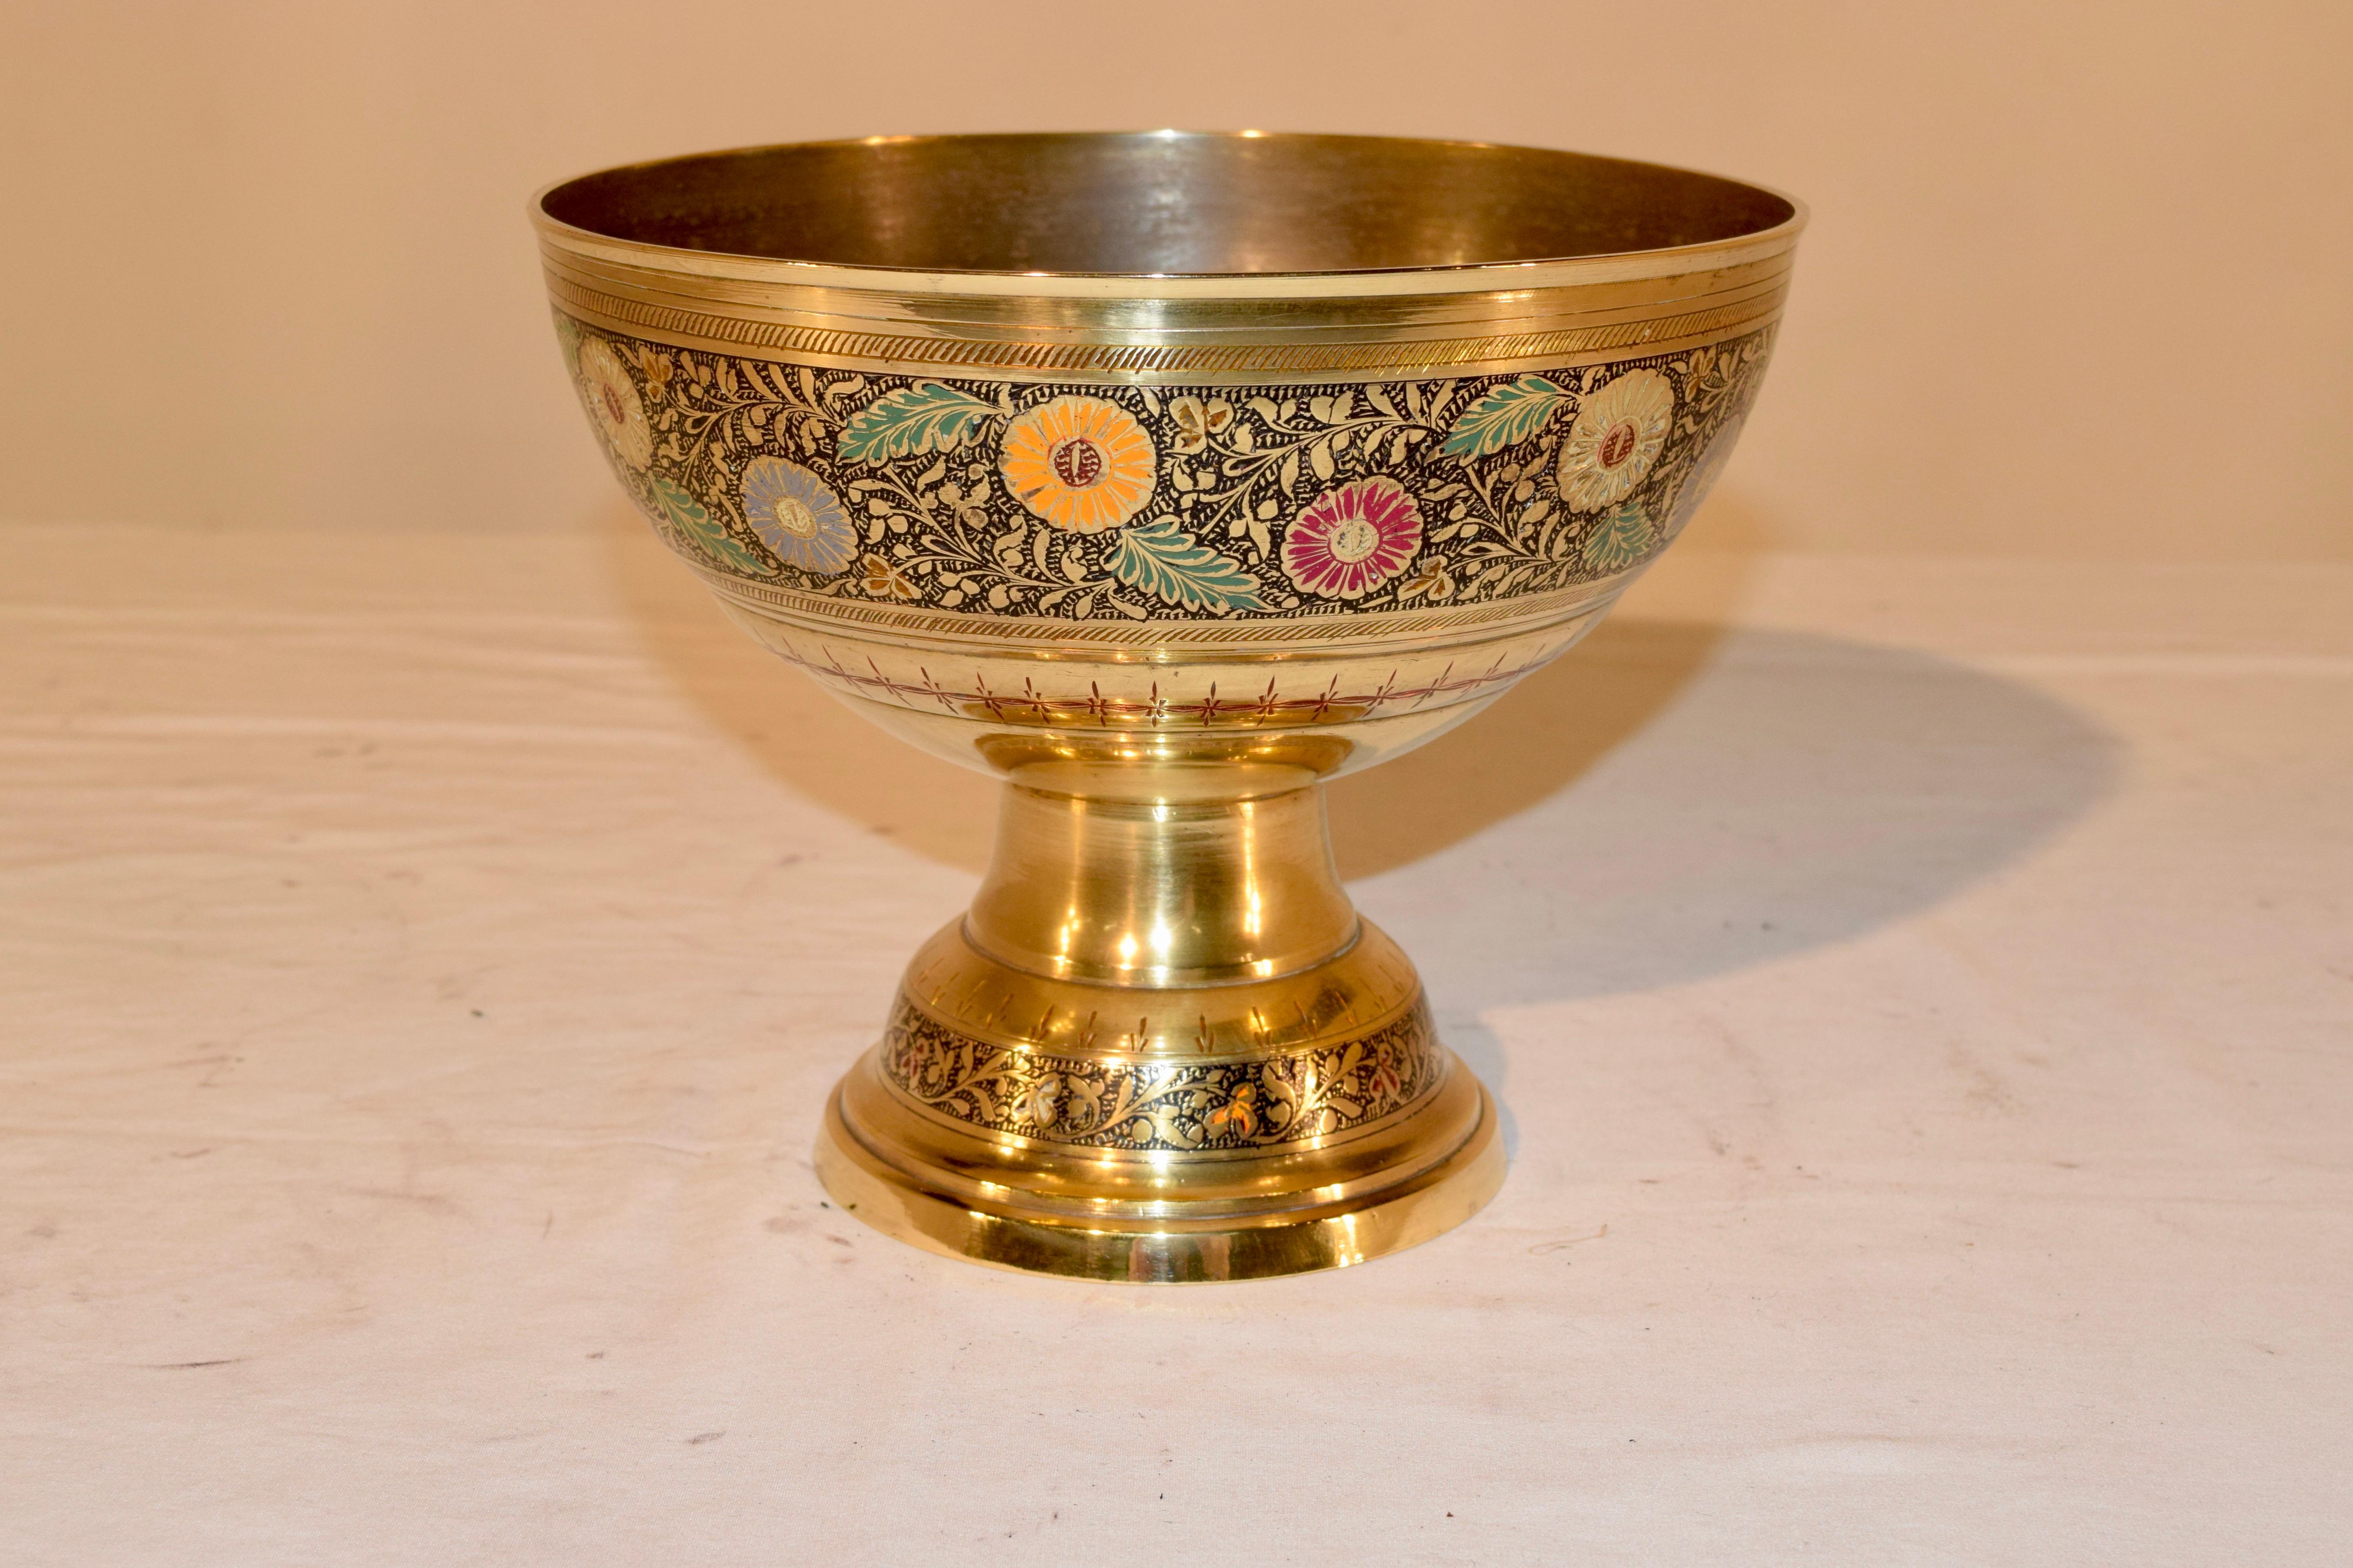 Vintage brass and enamel decorated pedestal bowl in a lovely form with hand painted flower decoration.